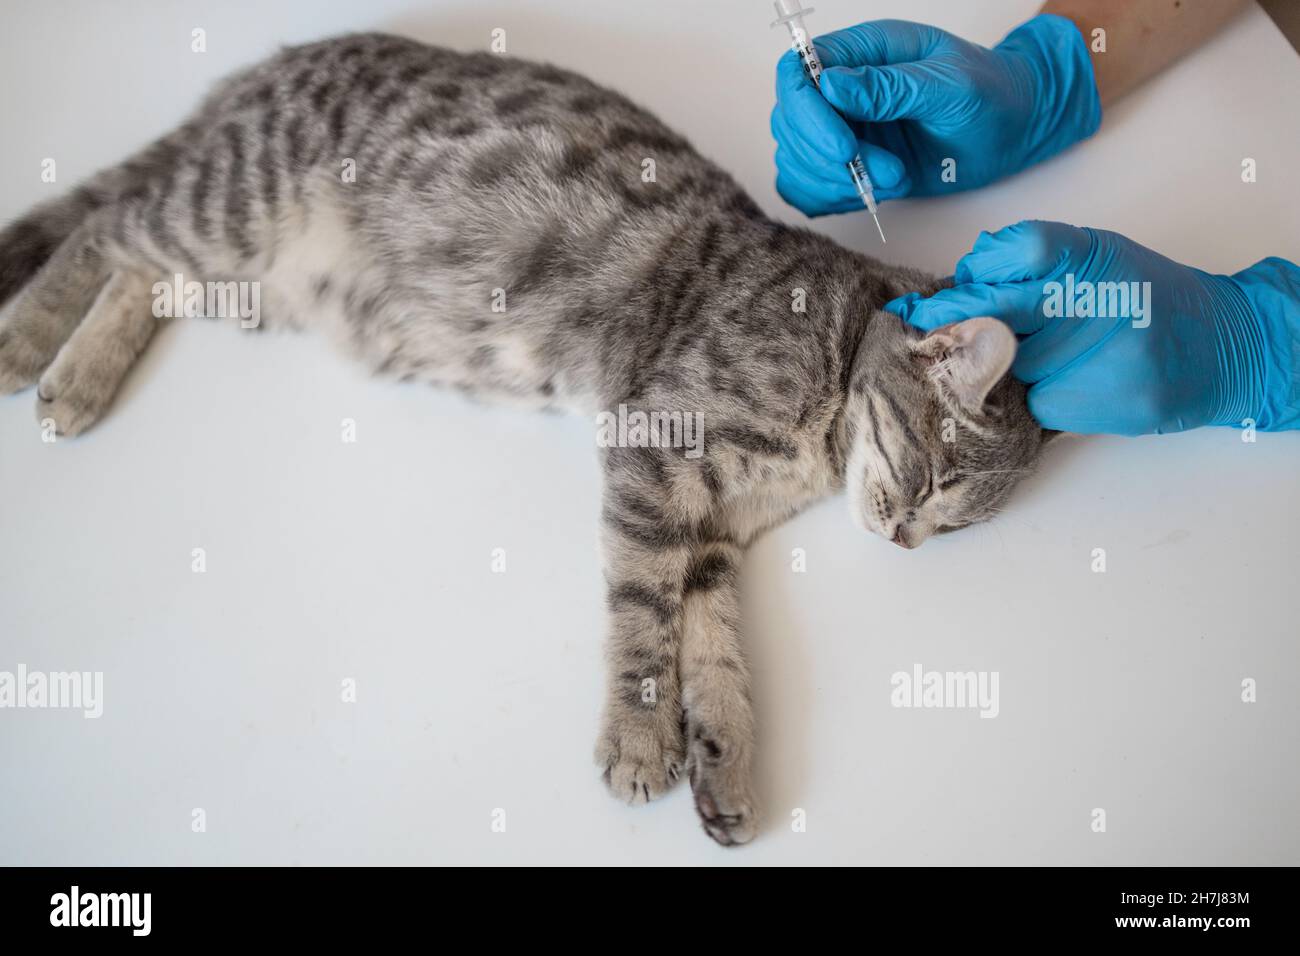 Veterinary doctor giving injection for kitten. Vaccination of animals. Domestic pet cat for examination in a vet clinic, hands of a veterinarian. Stock Photo